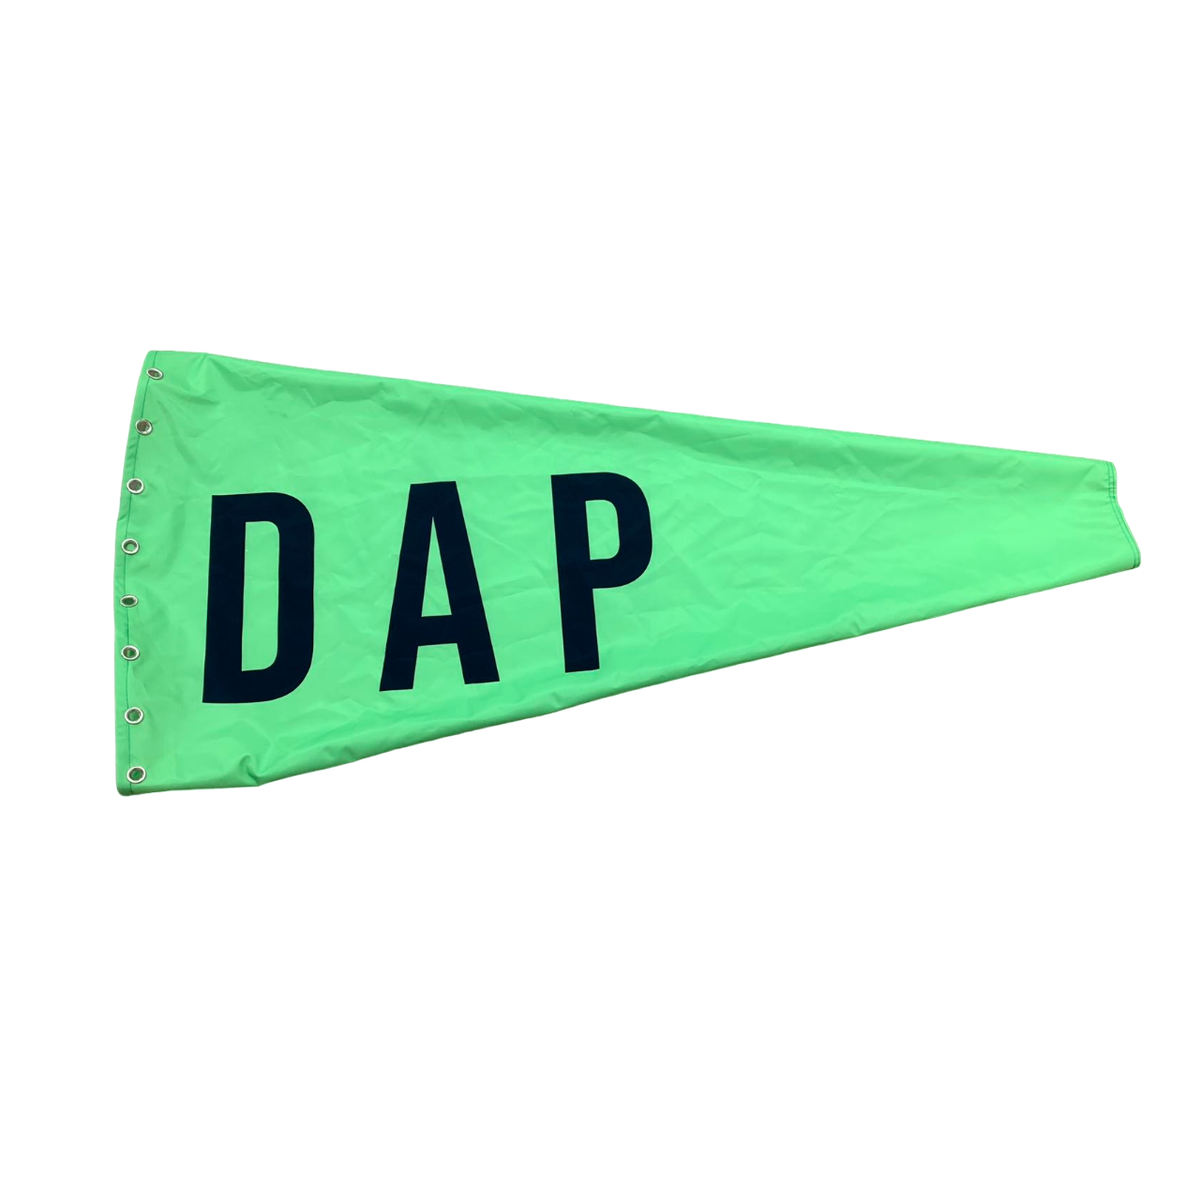 Designated Assembly Point (DAP) green windsock for oil and gas and refineries 